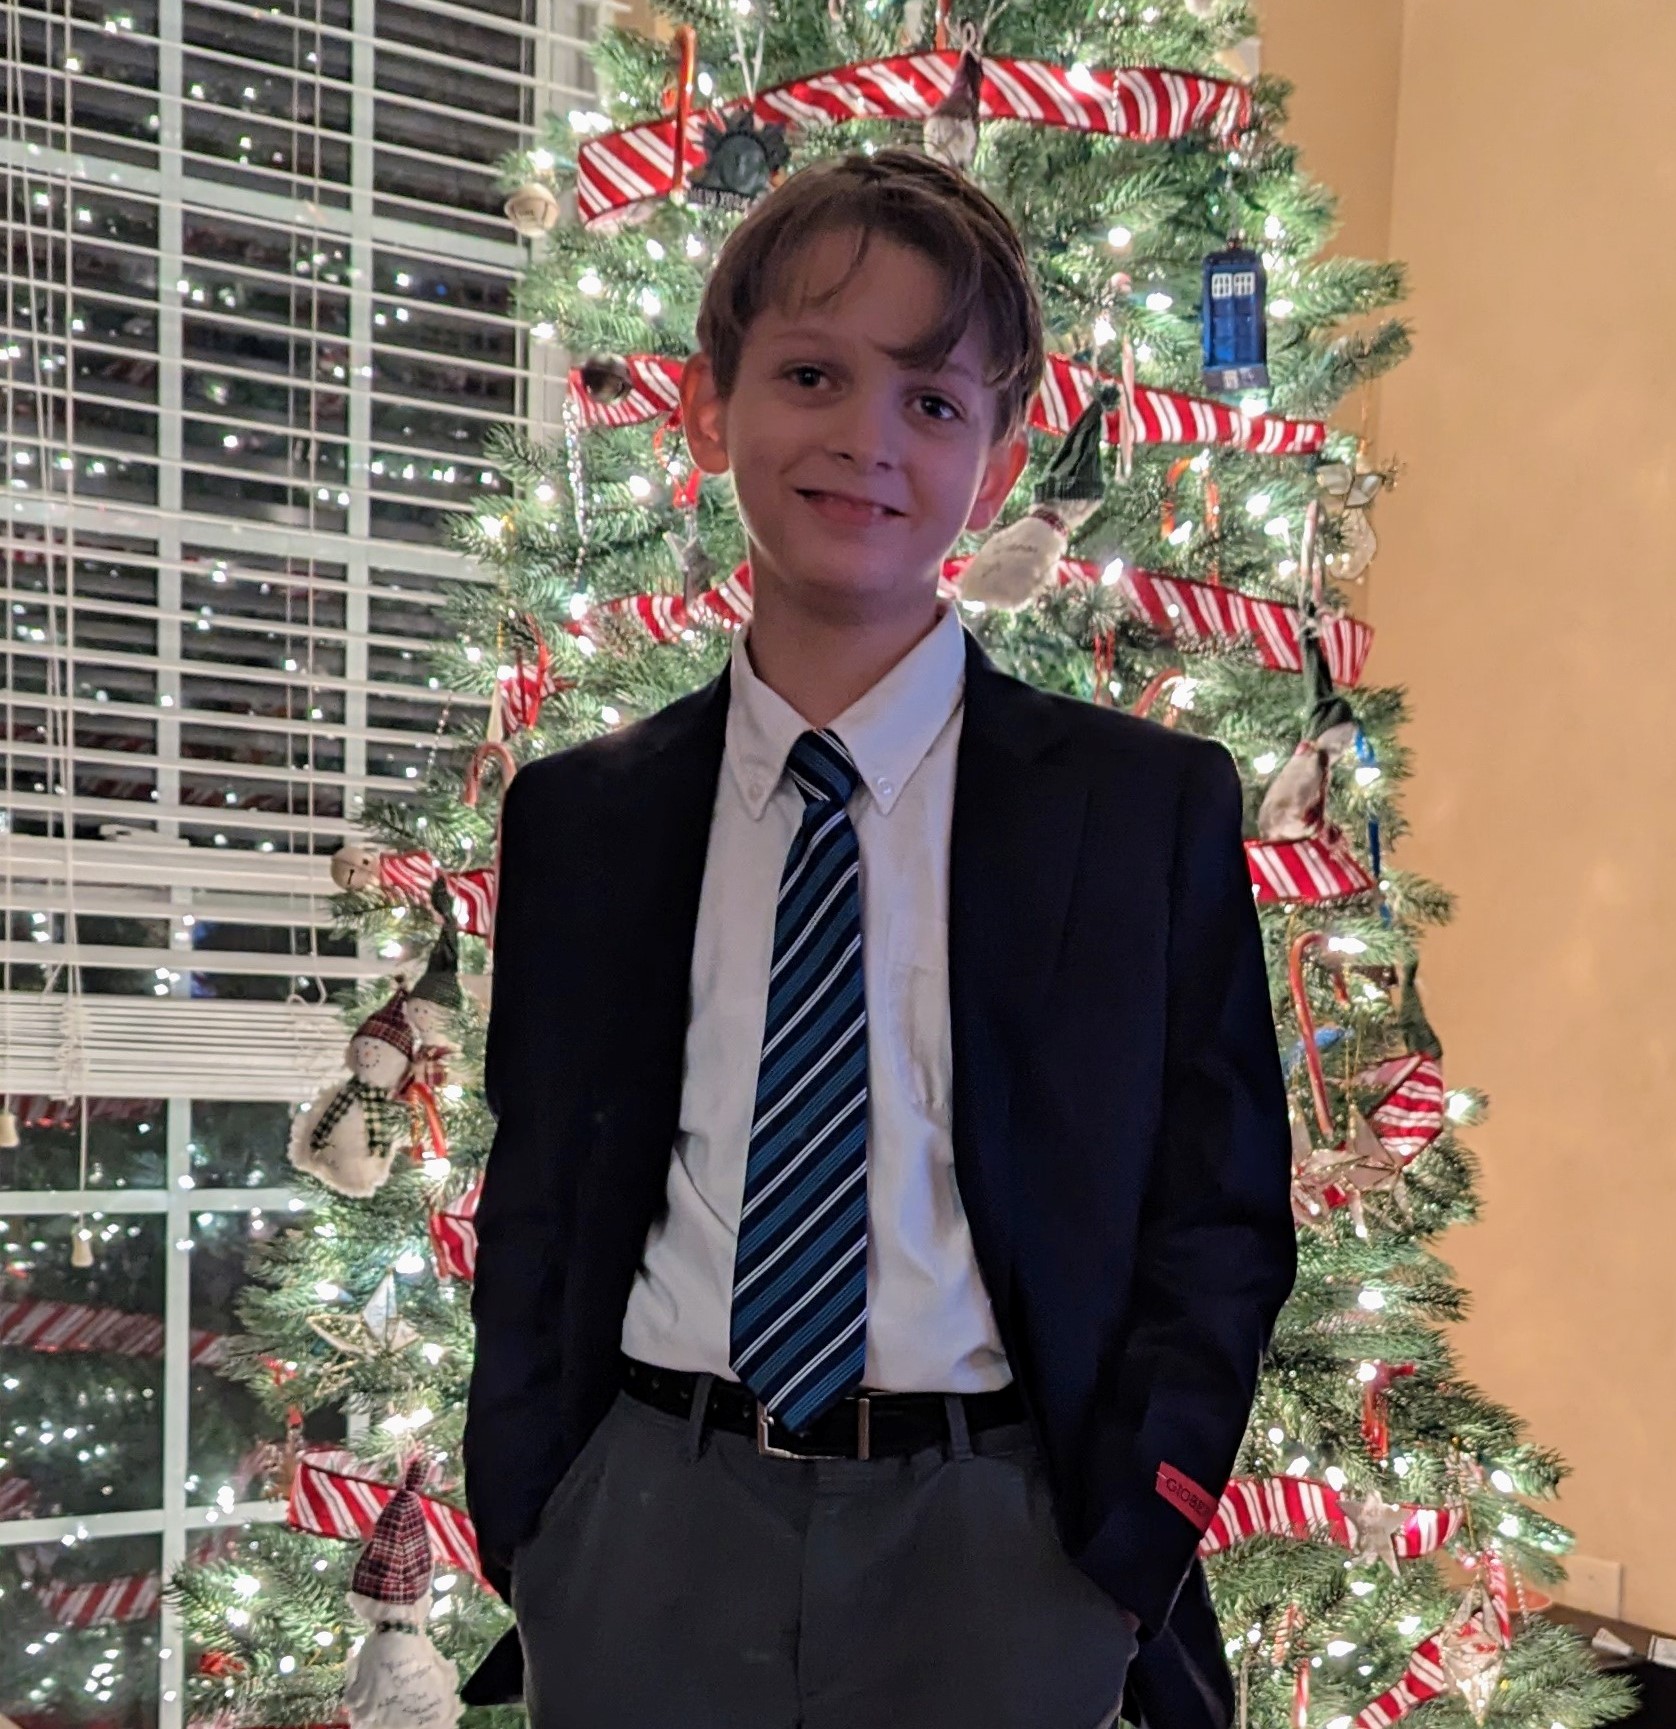 My Kid Can't Go to the School Dance ... Can He?